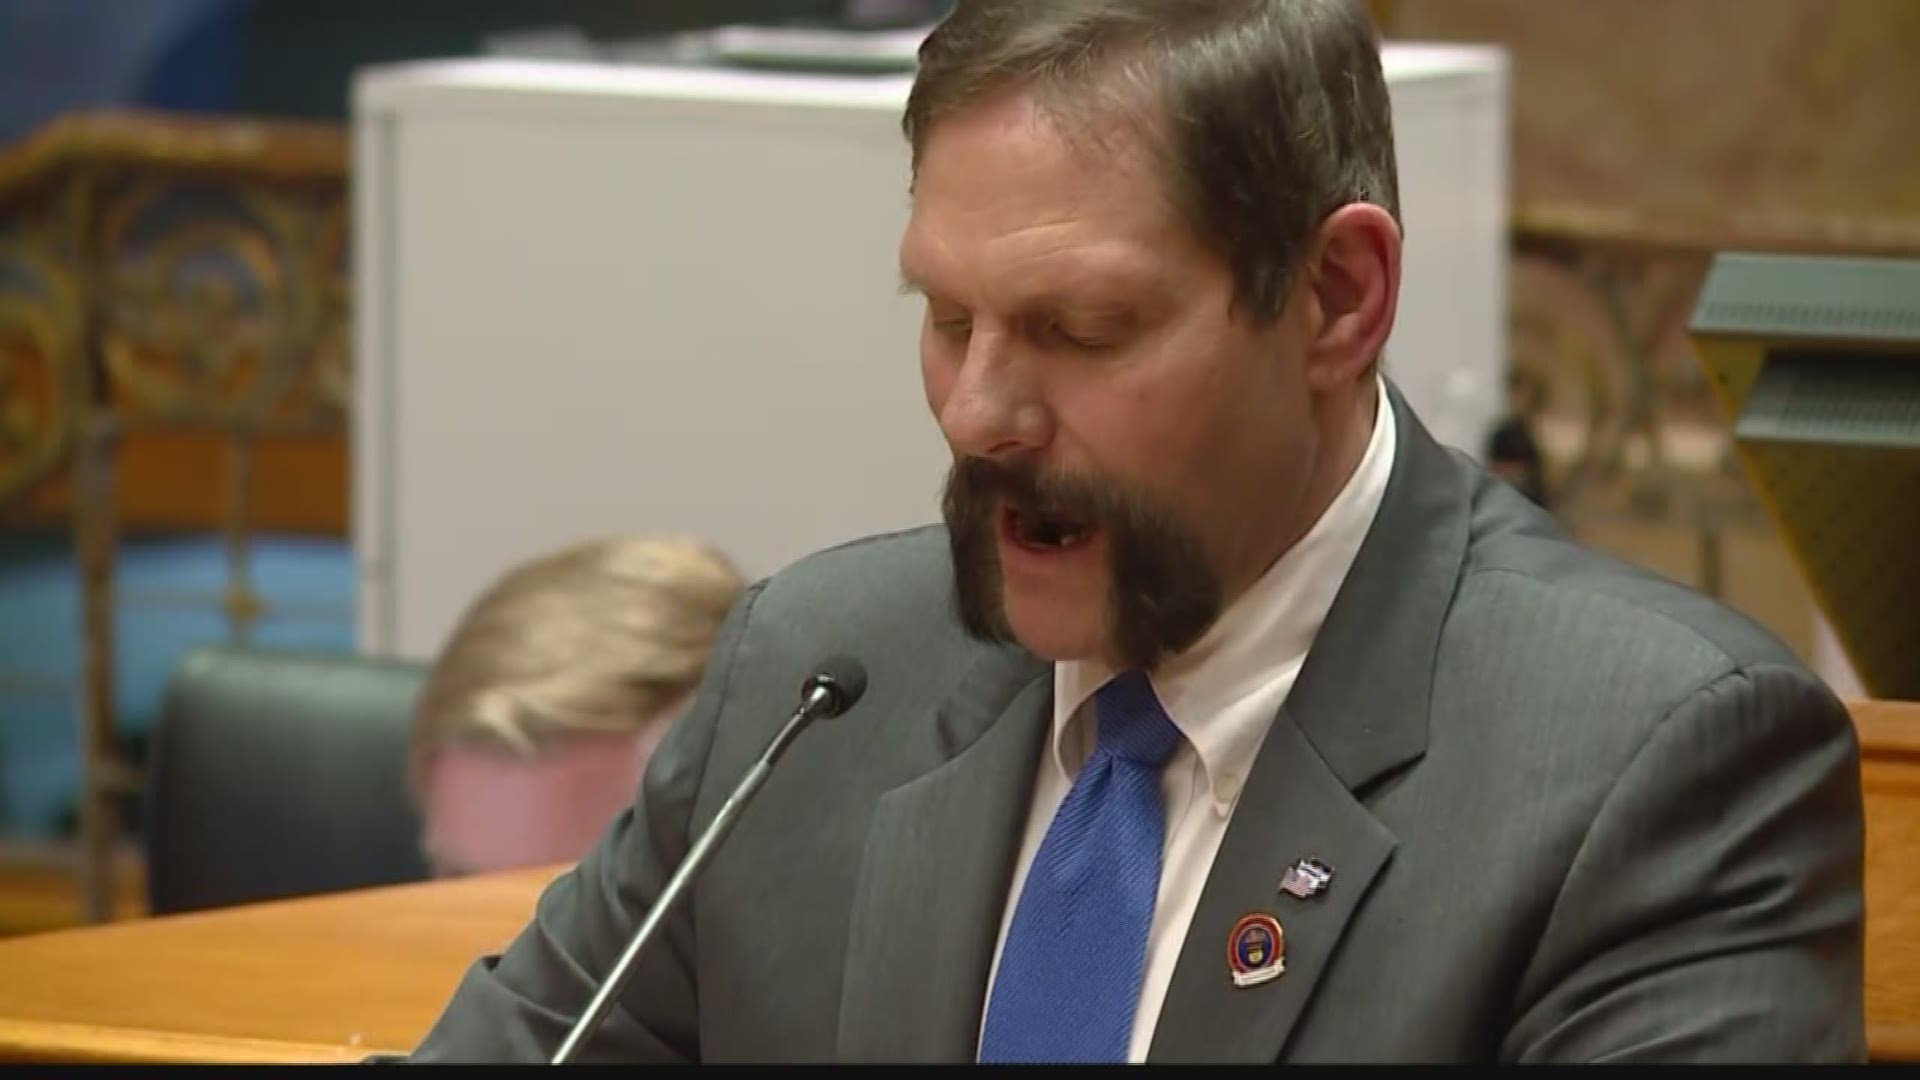 Colorado State Sen. Randy Baumgardner (R-Sulphur Springs) announced his retirement on Monday, months after an effort to expel him failed in the general assembly. Colorado Senate Republicans told 9NEWS that Baumgardner’s retirement will be effective starting Jan. 21.